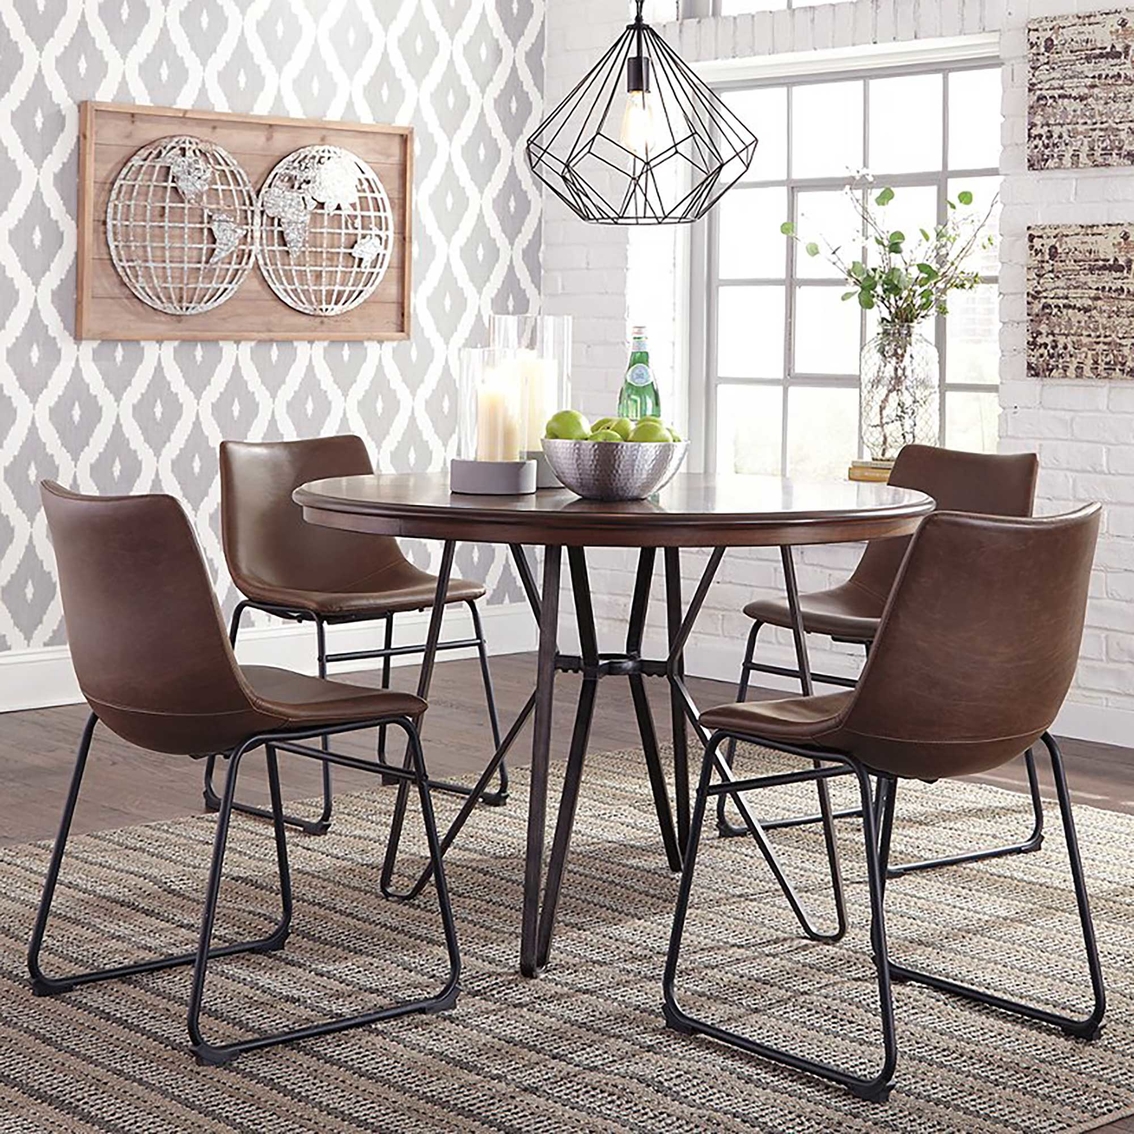 Signature Design by Ashley Centiar Collection Dining 5 pc. Set - Image 5 of 6